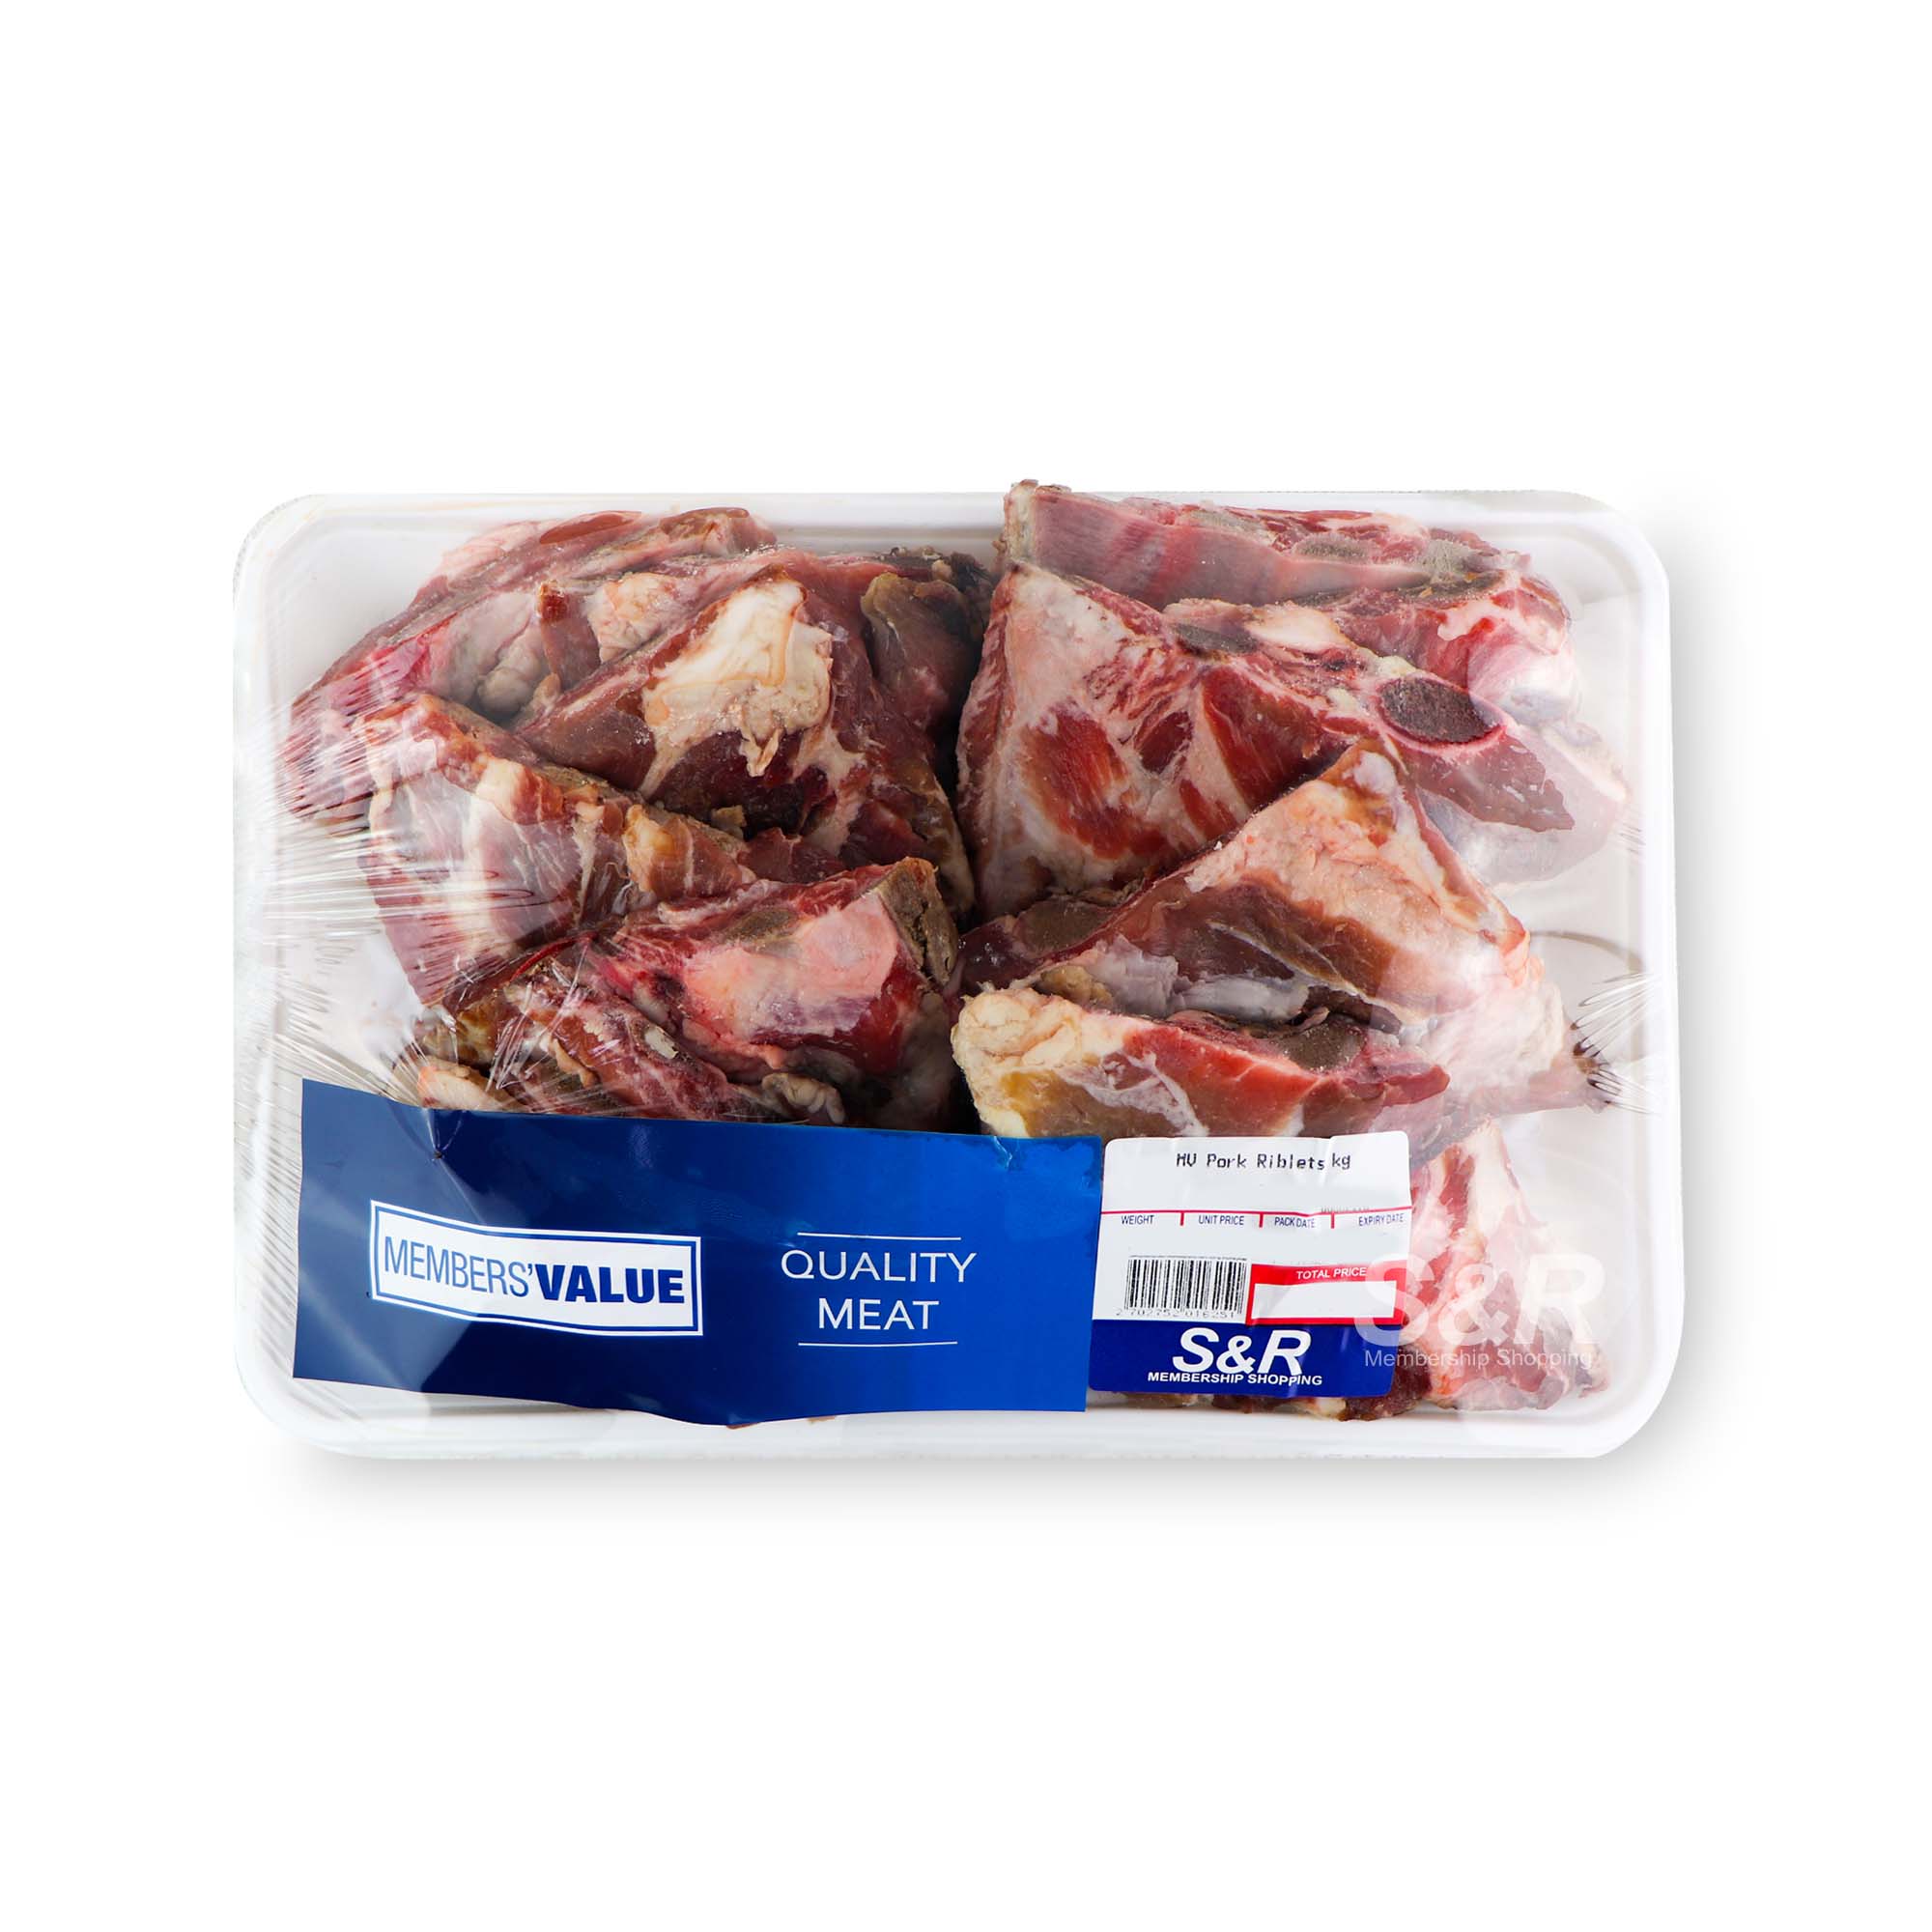 Members' Value Pork Riblets approx. 1.7kg